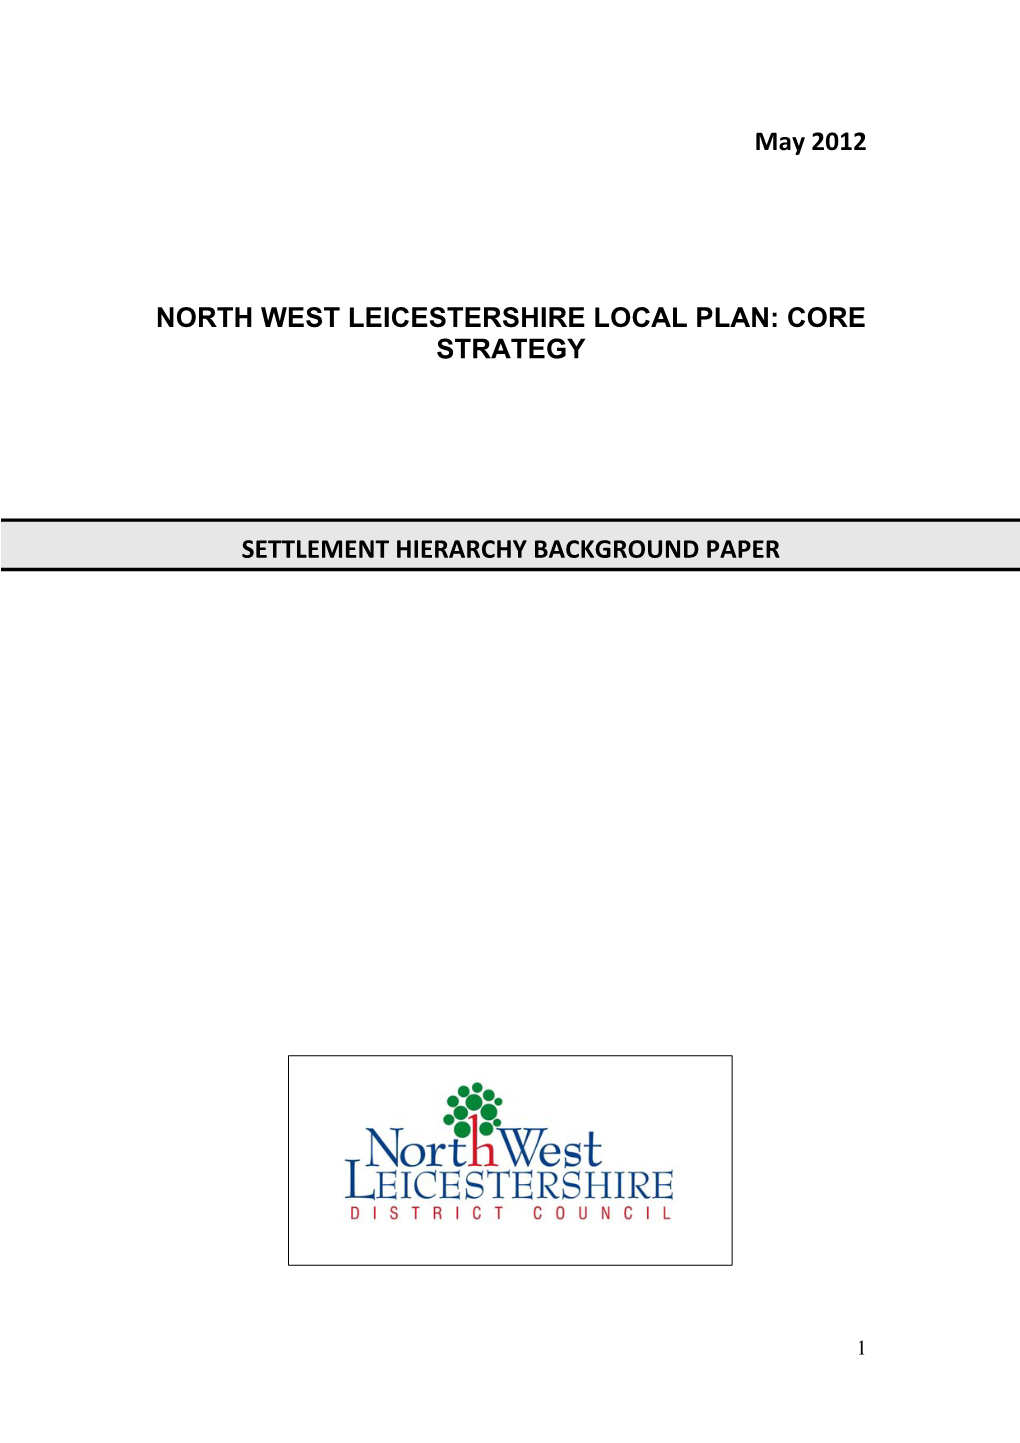 Settlement Hierarchy Background Paper